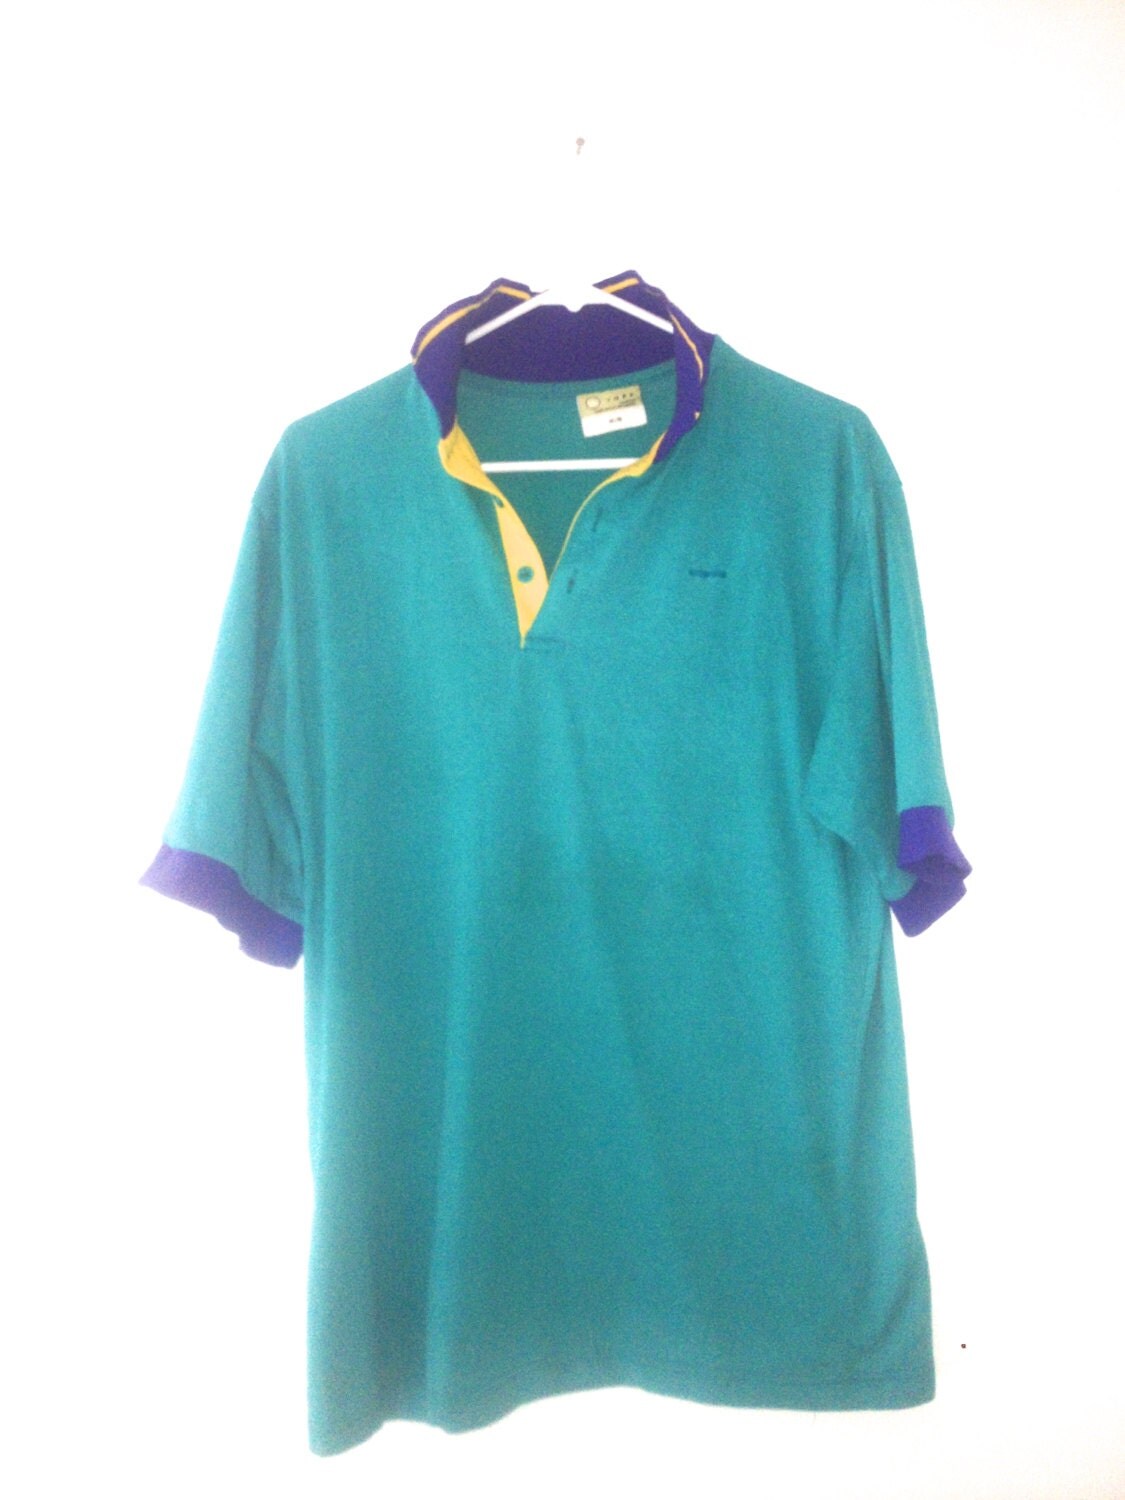 early 90s colorblock polo shirt//vintage 90s by ladyboysvintage